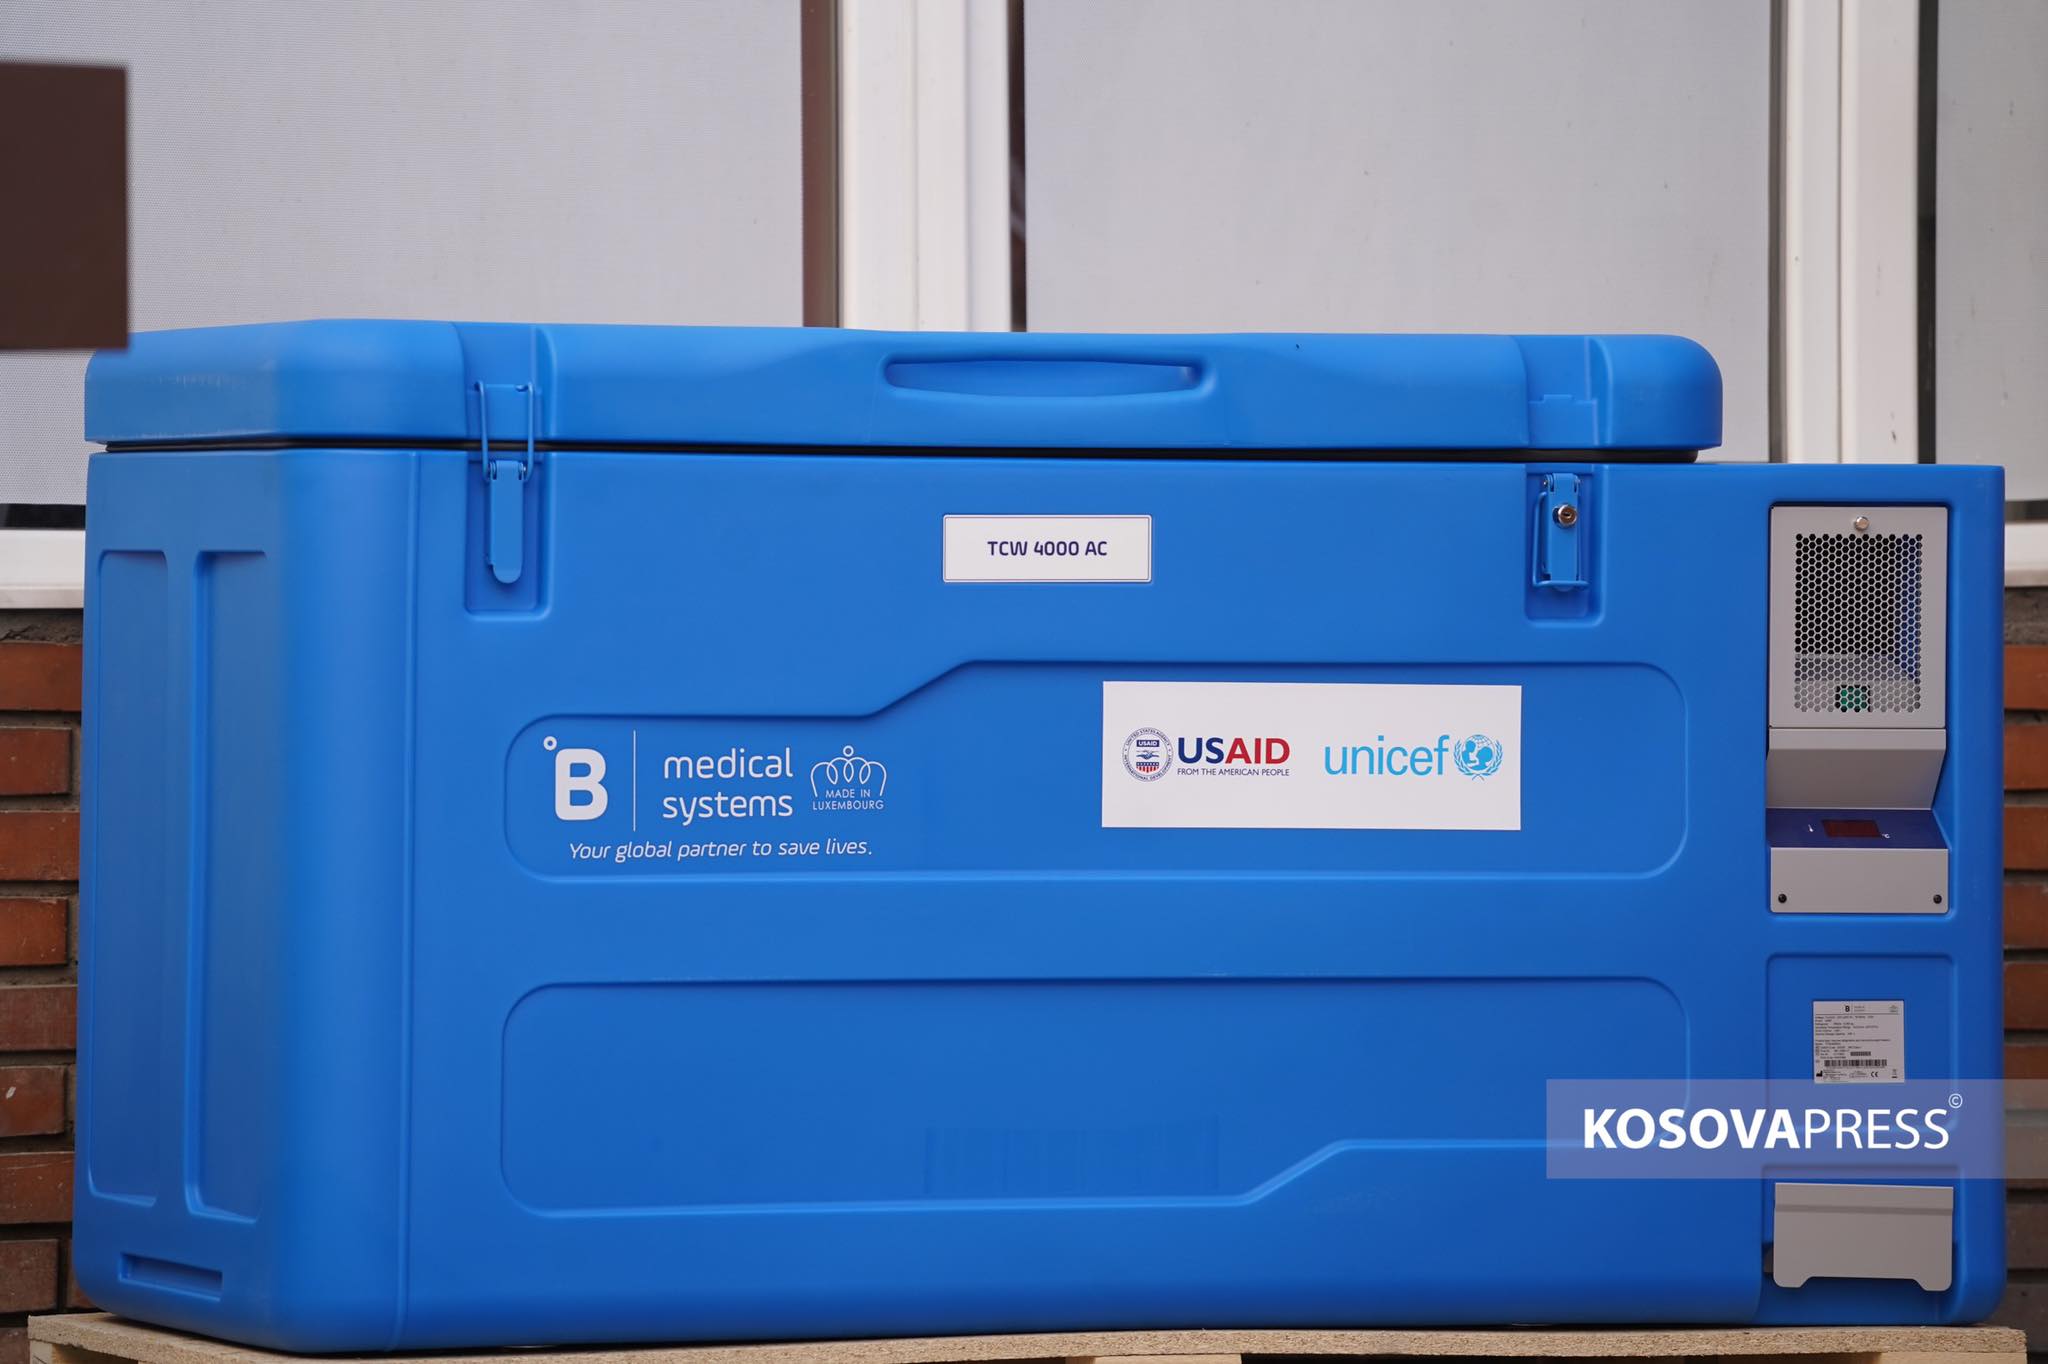 UNICEF and USAID donate 270 vaccine refrigerators and freezers